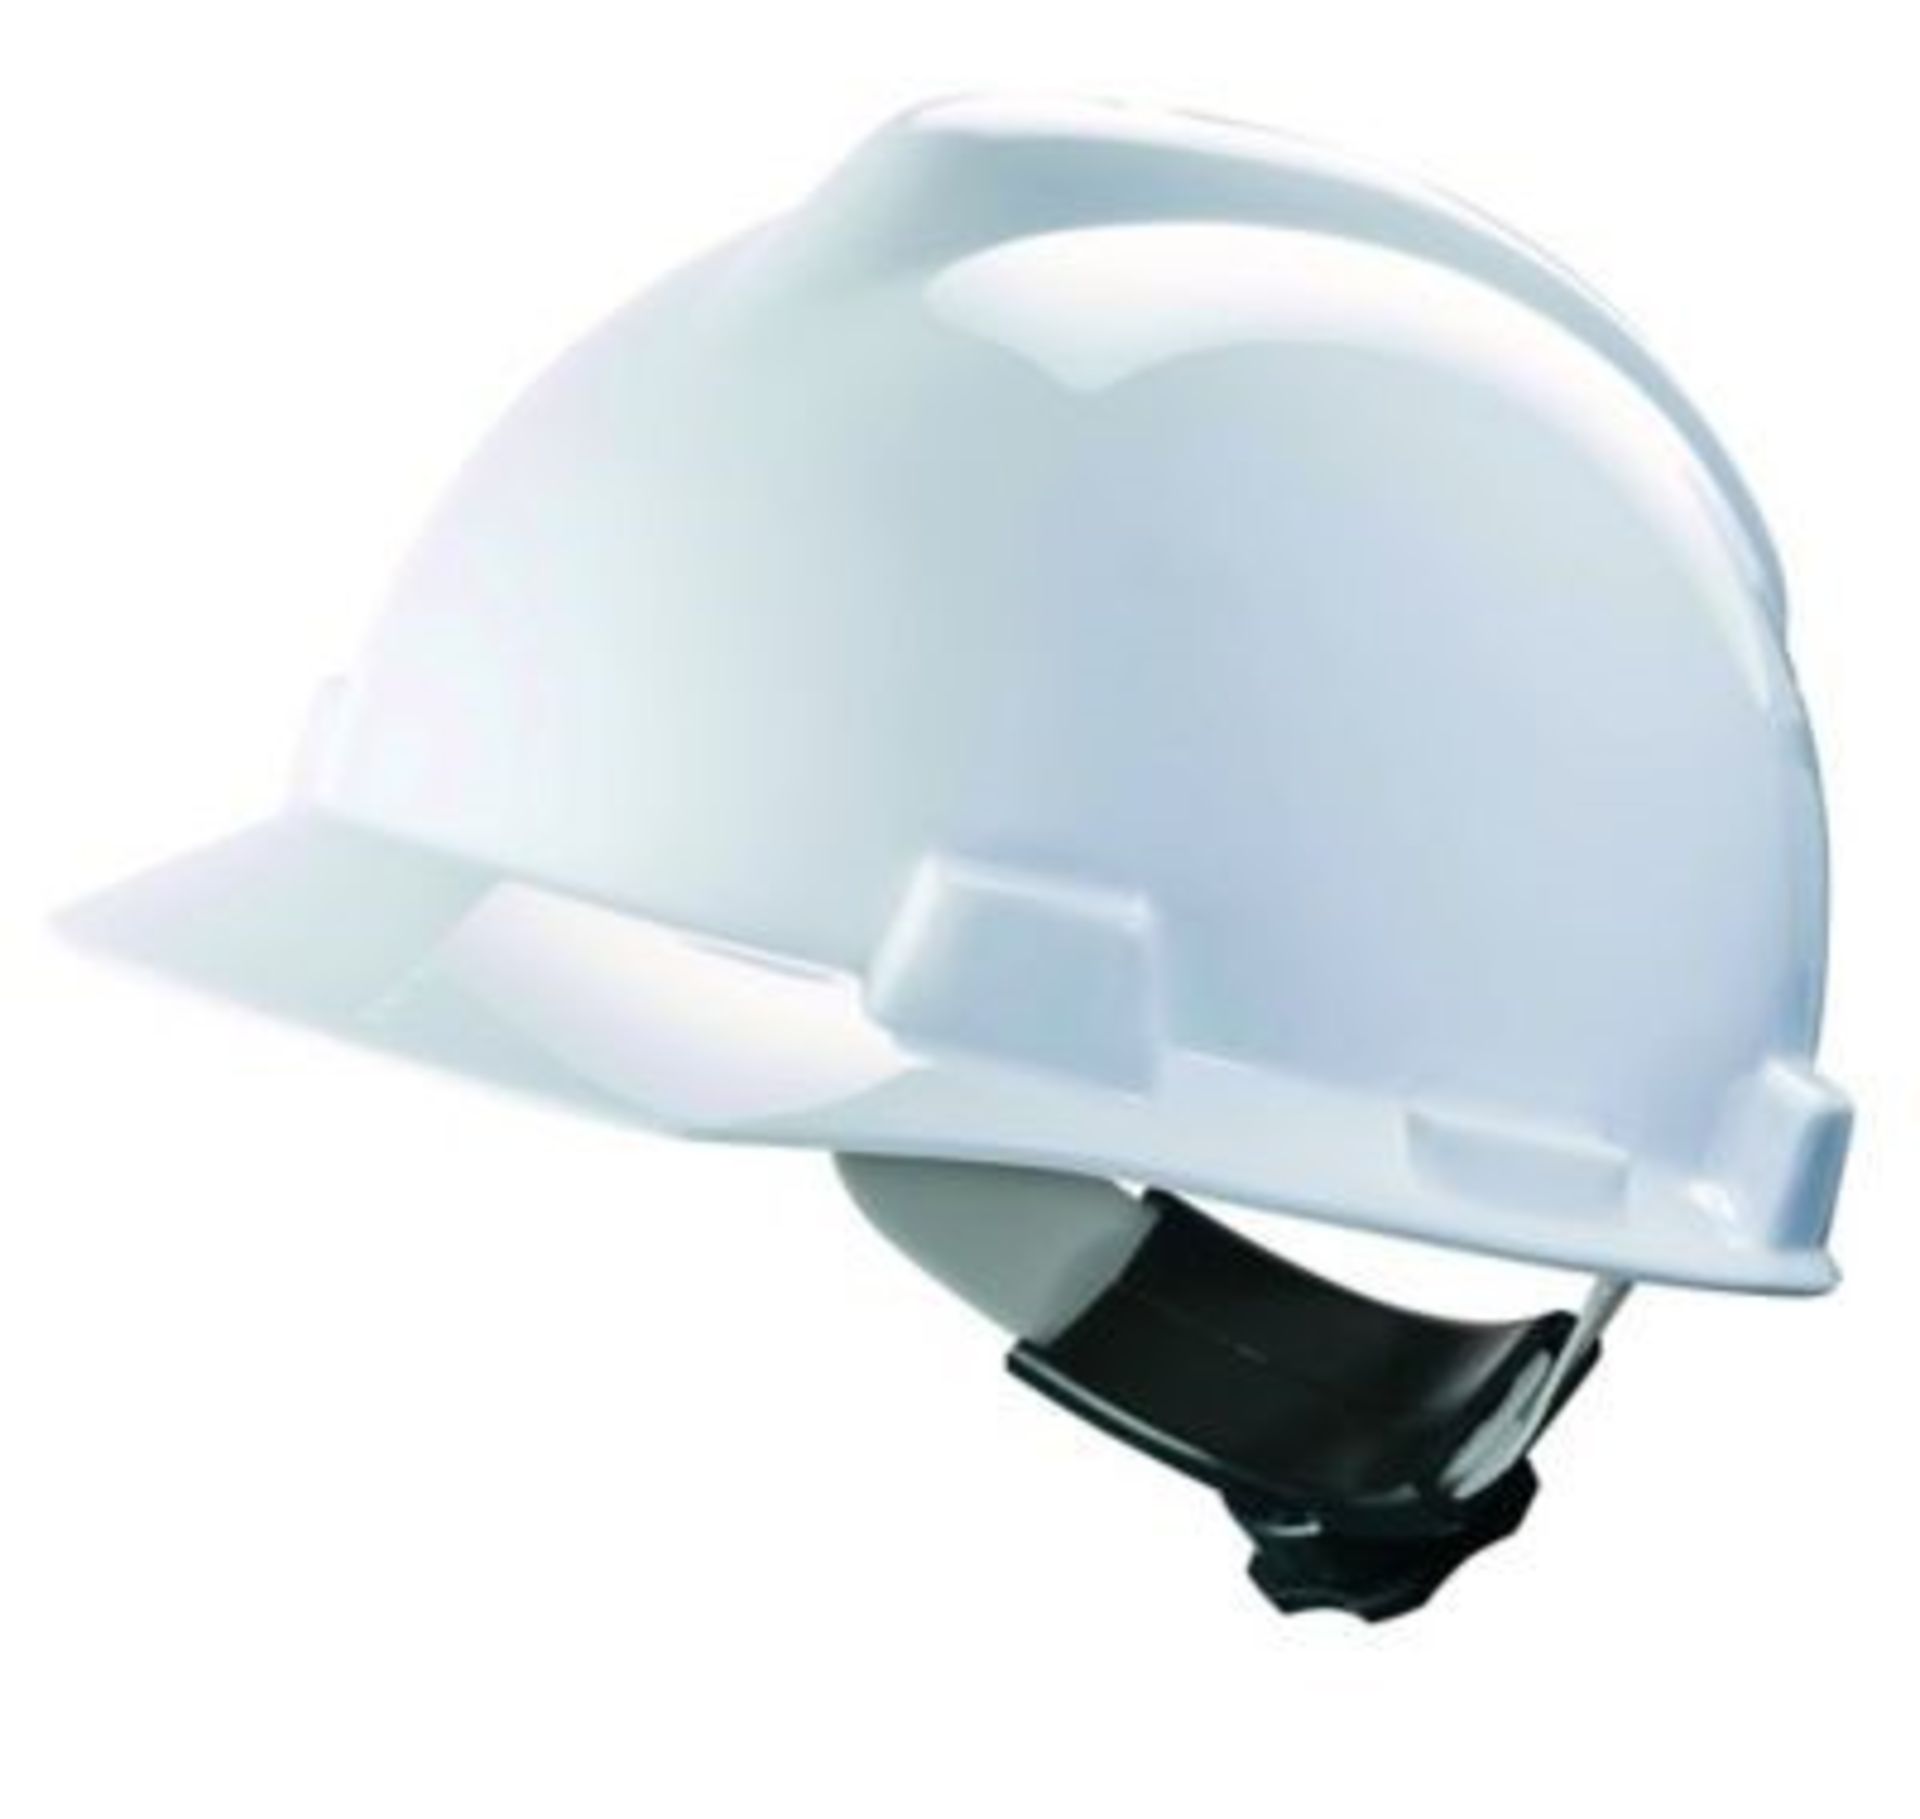 11 x V-Gard Protective Helmets With Fas-Trac Suspension And Sewn PVC Sweatband - Colour White -